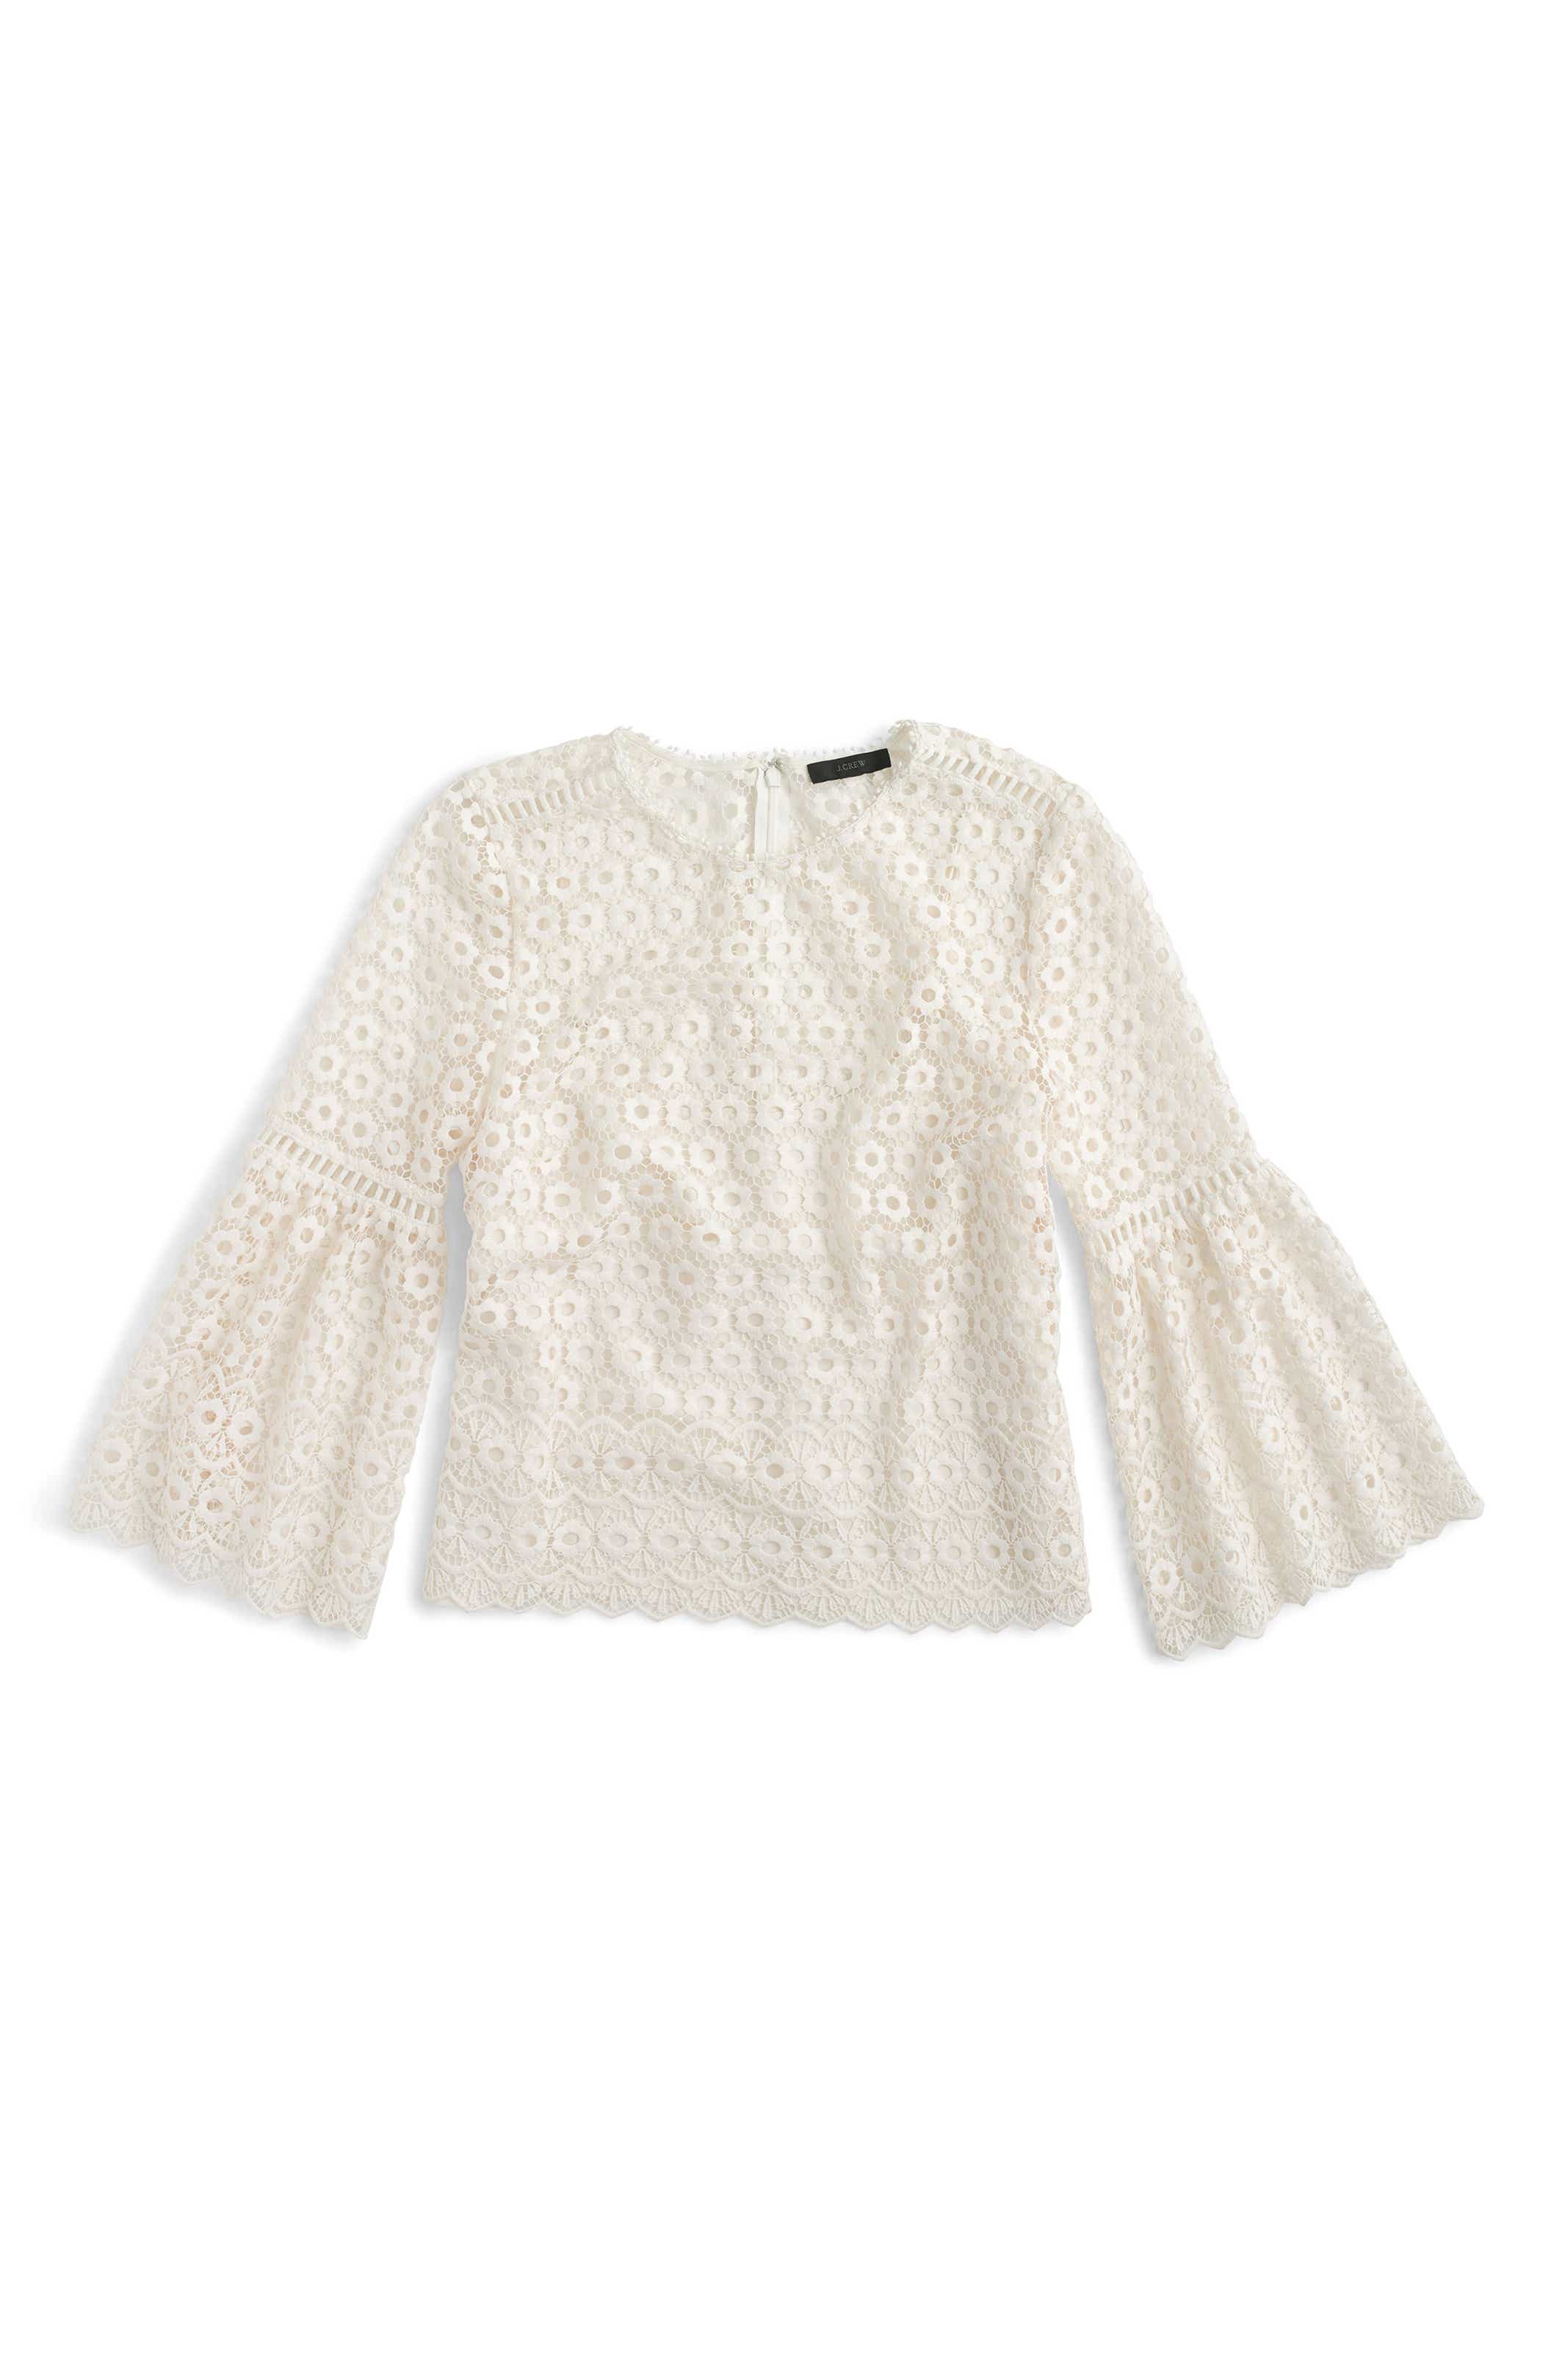 J.Crew Bell Sleeve Daisy Lace Top | Nordstrom